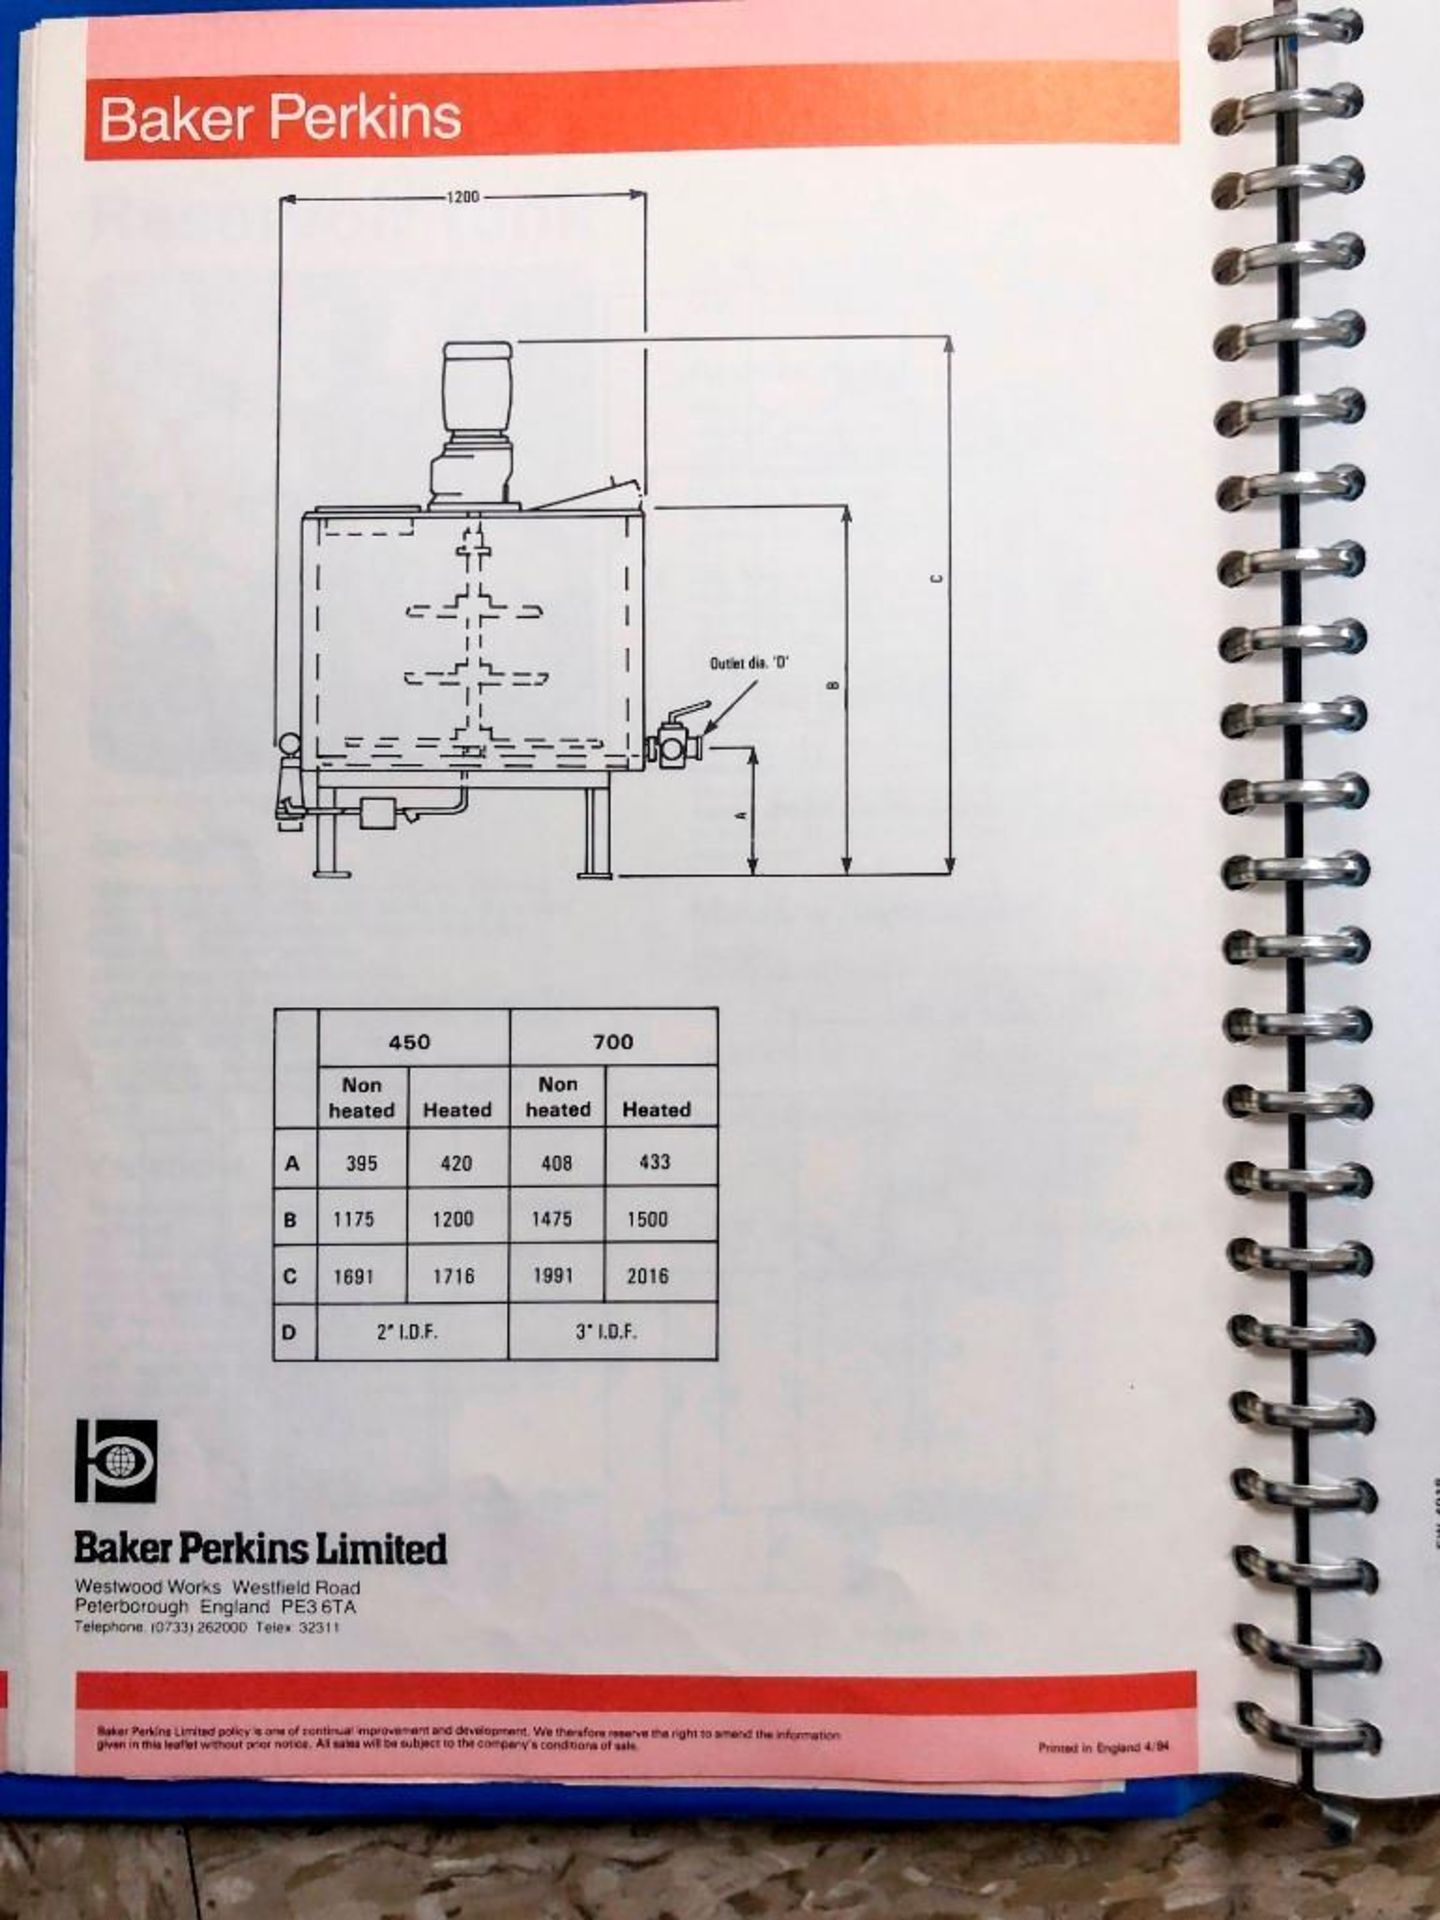 Baker Perkins PLC Autofeed Cooker - Image 19 of 23